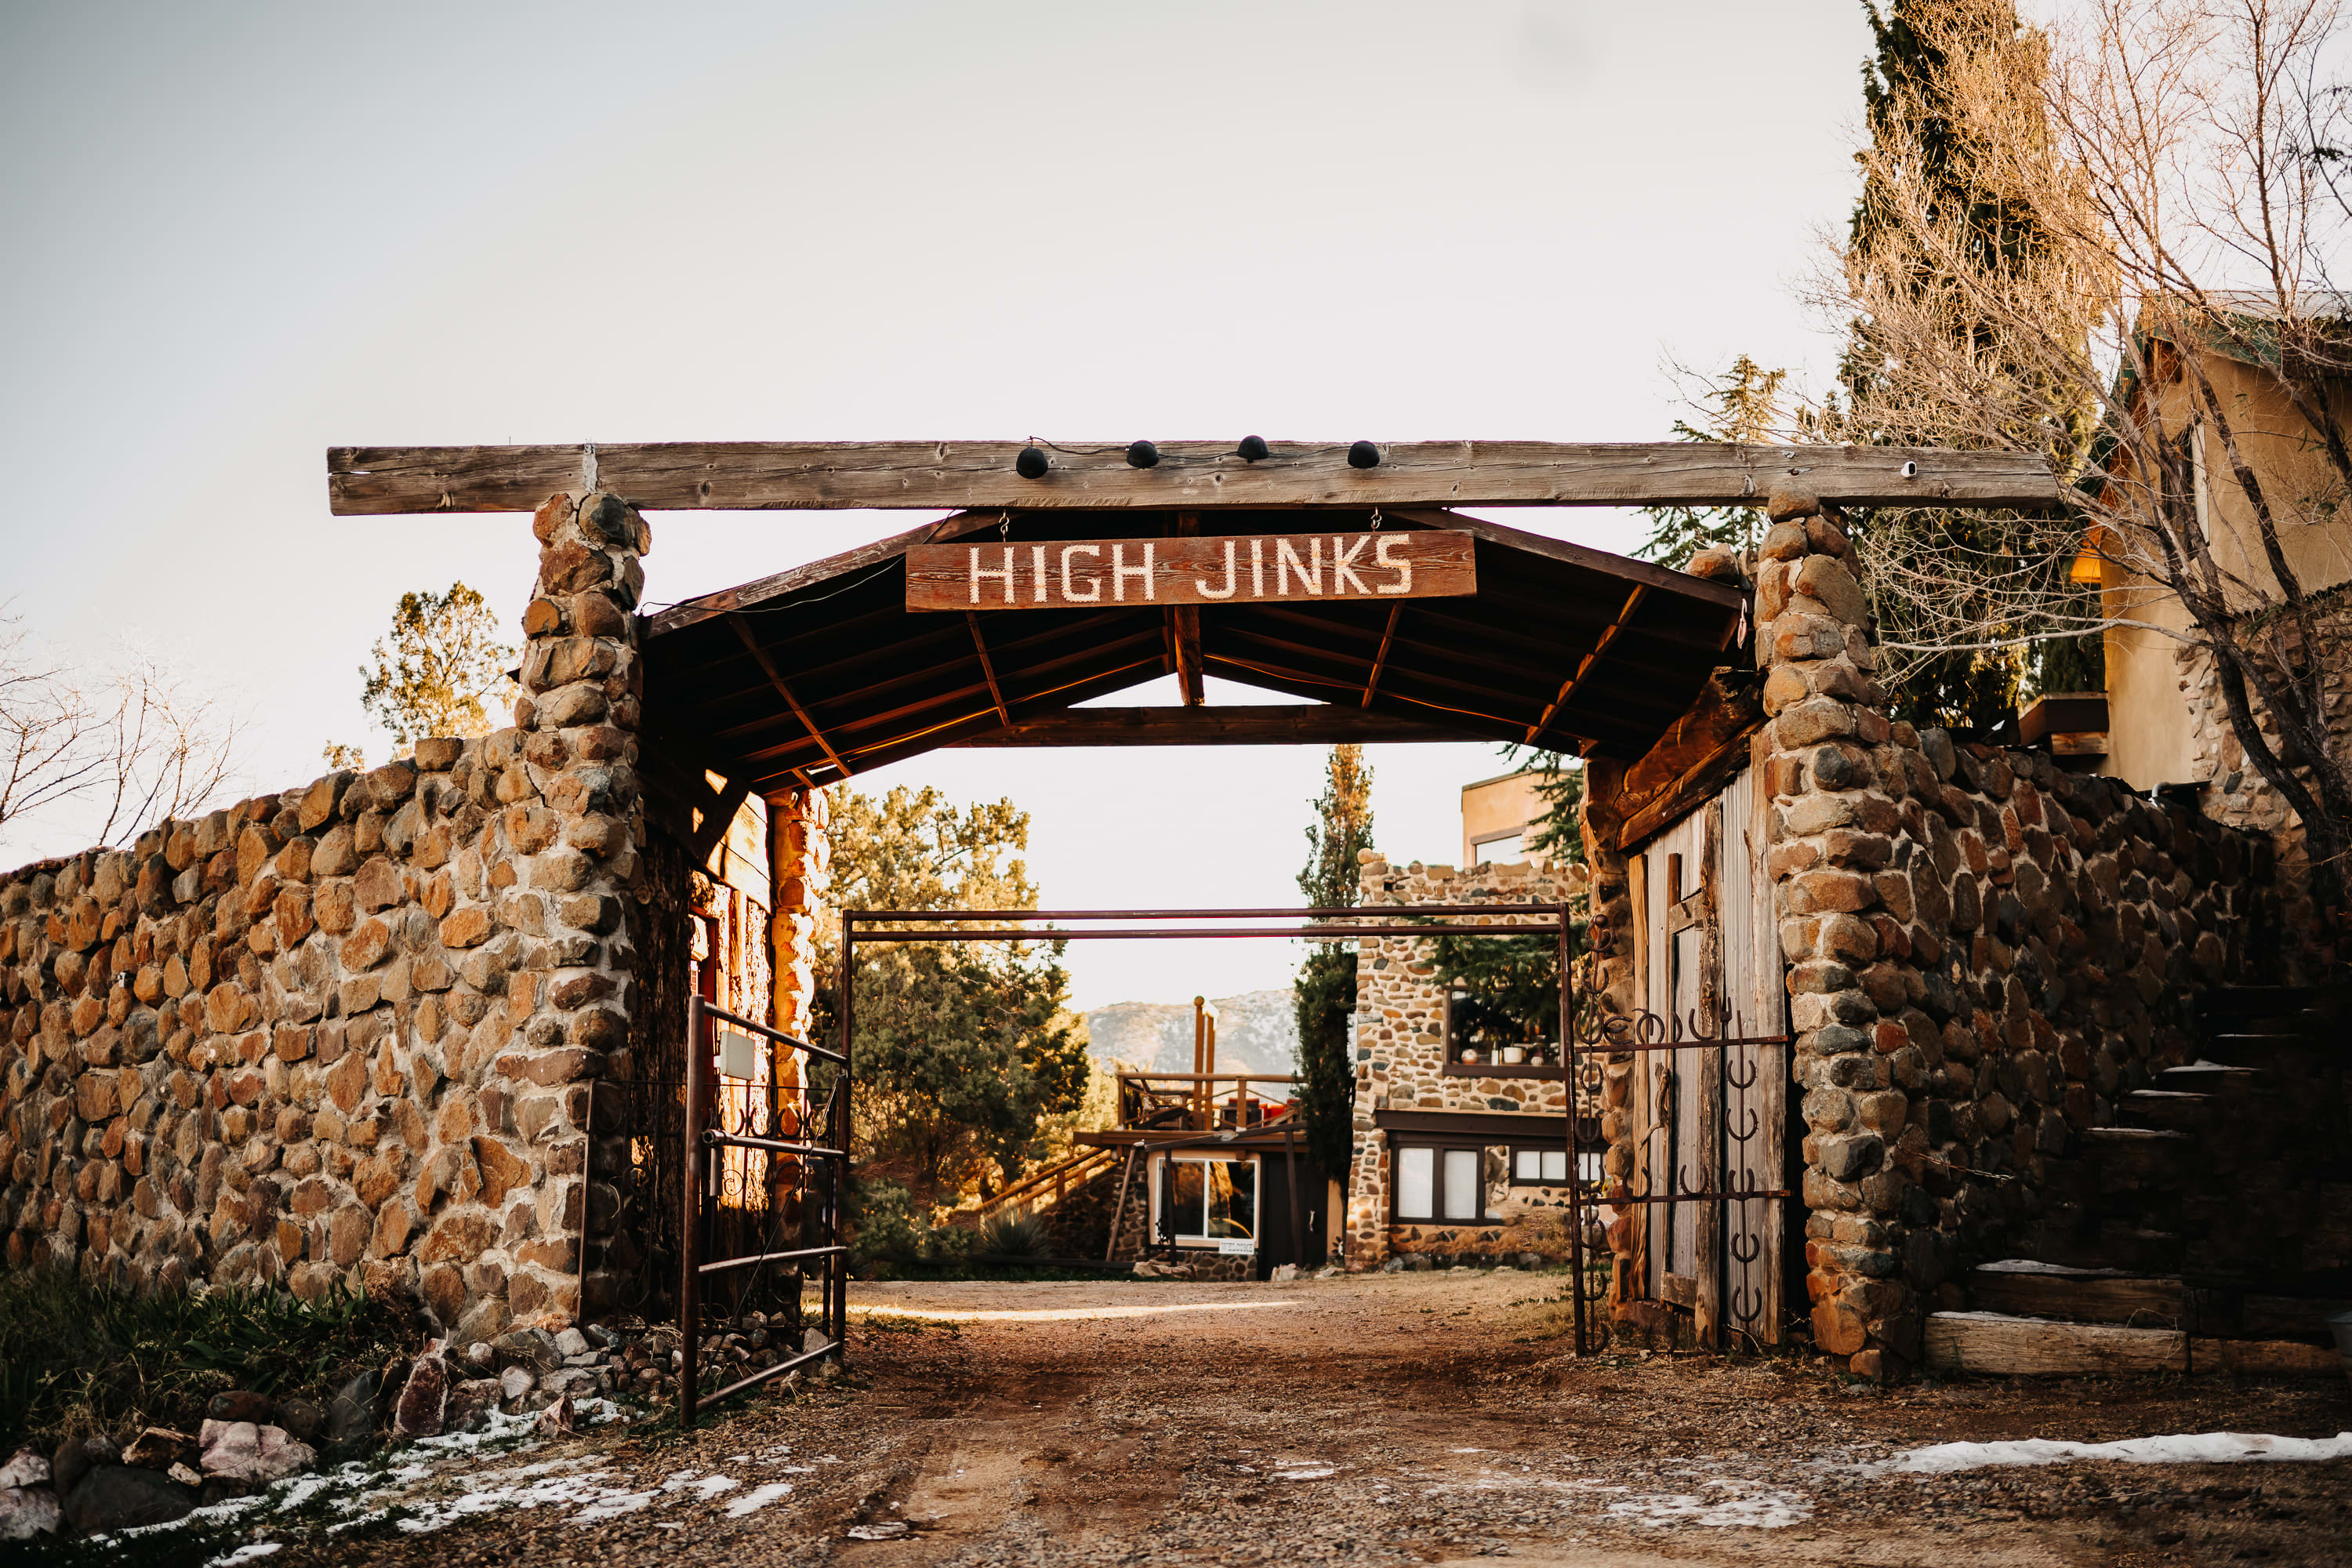 Entrance to courtyard of High Jinks. To the right (where you see some stairs) is where we offer water year-round to hikers, bicyclists, horseback riders.